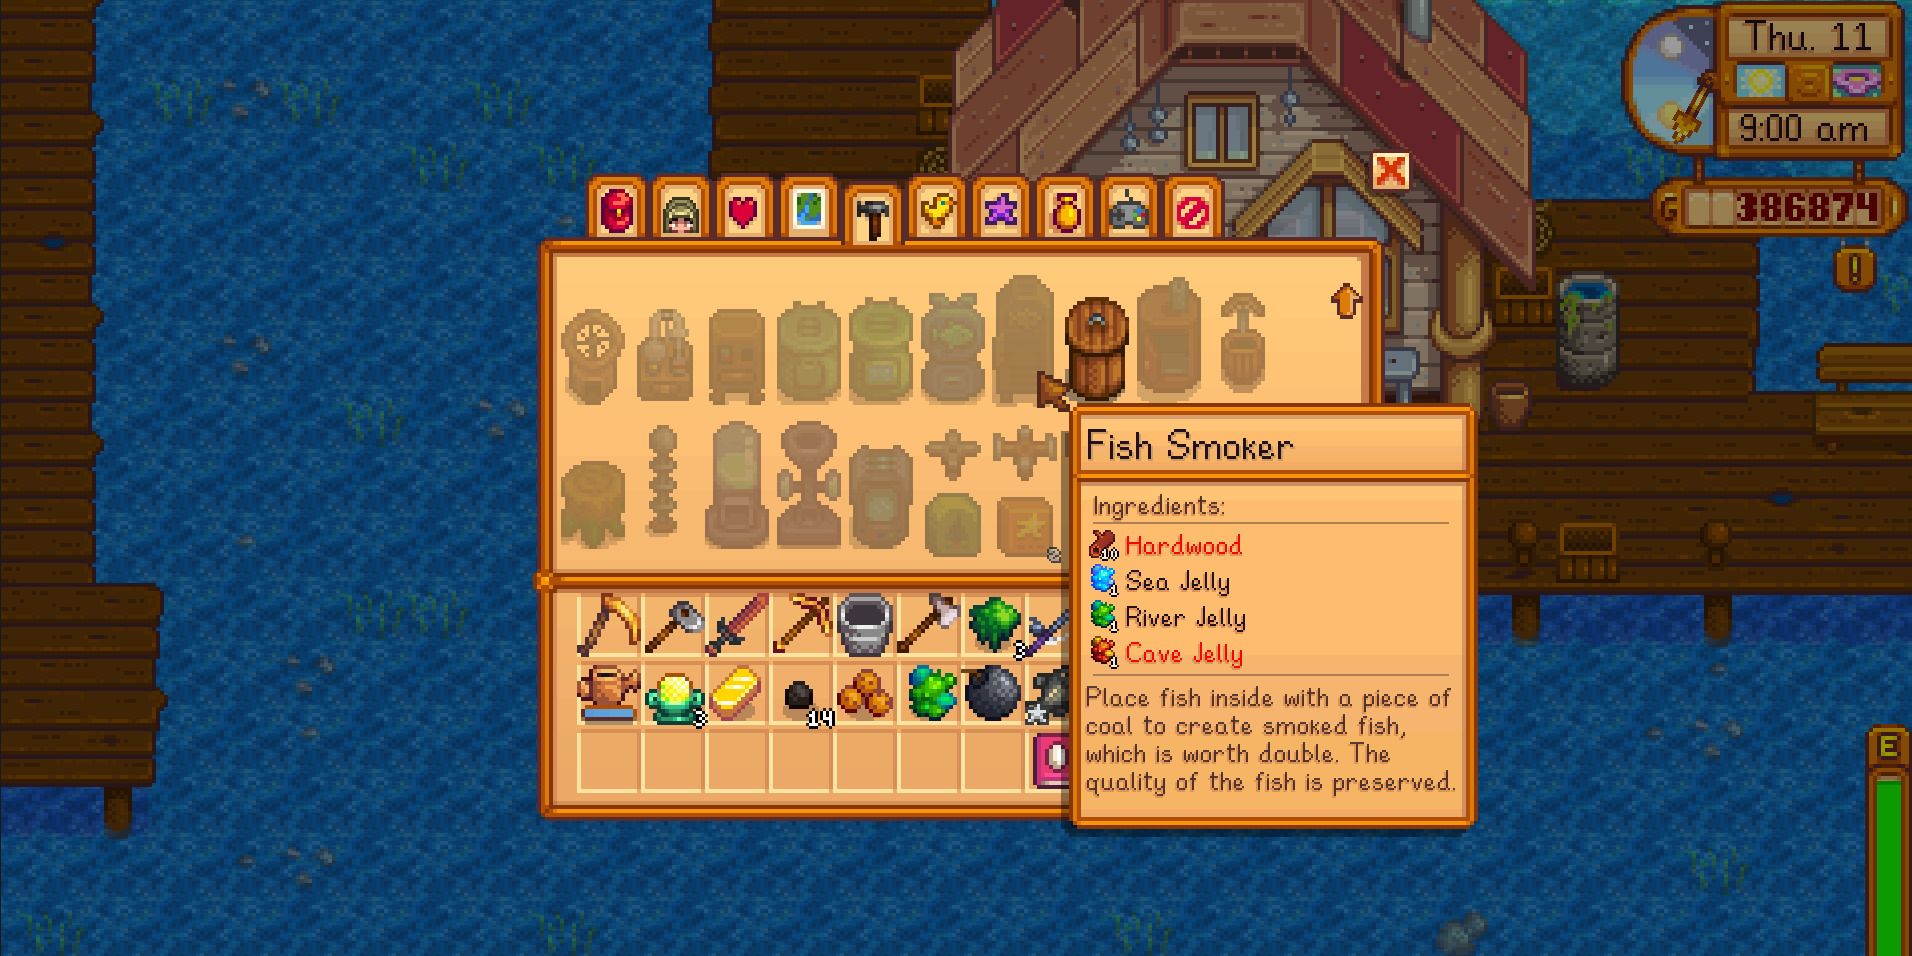 Image of the recipe to create a Fish Smoker in Stardew Valley